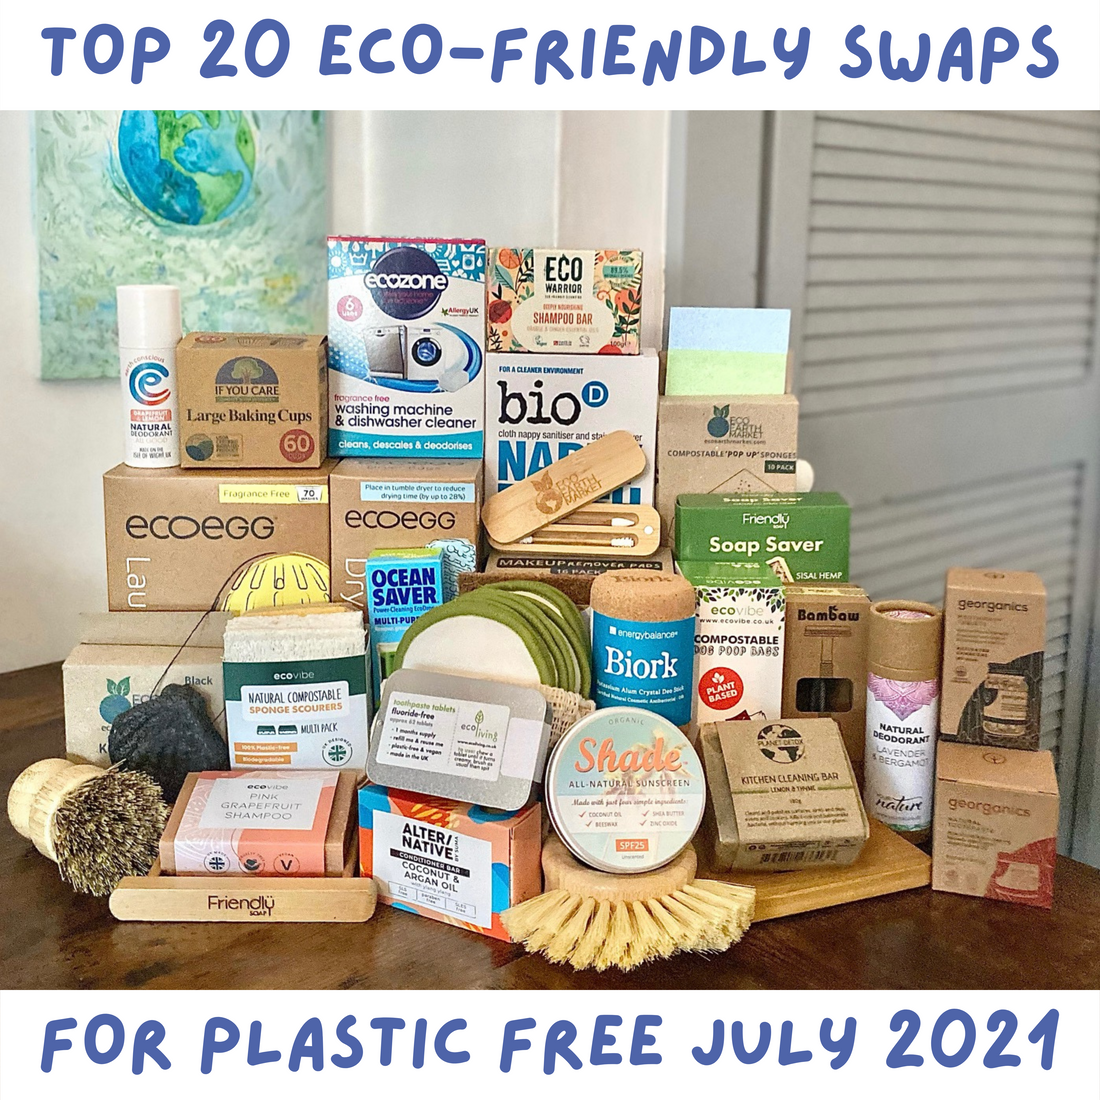 Top 20 Eco-Friendly Swaps for Plastic Free July 2021